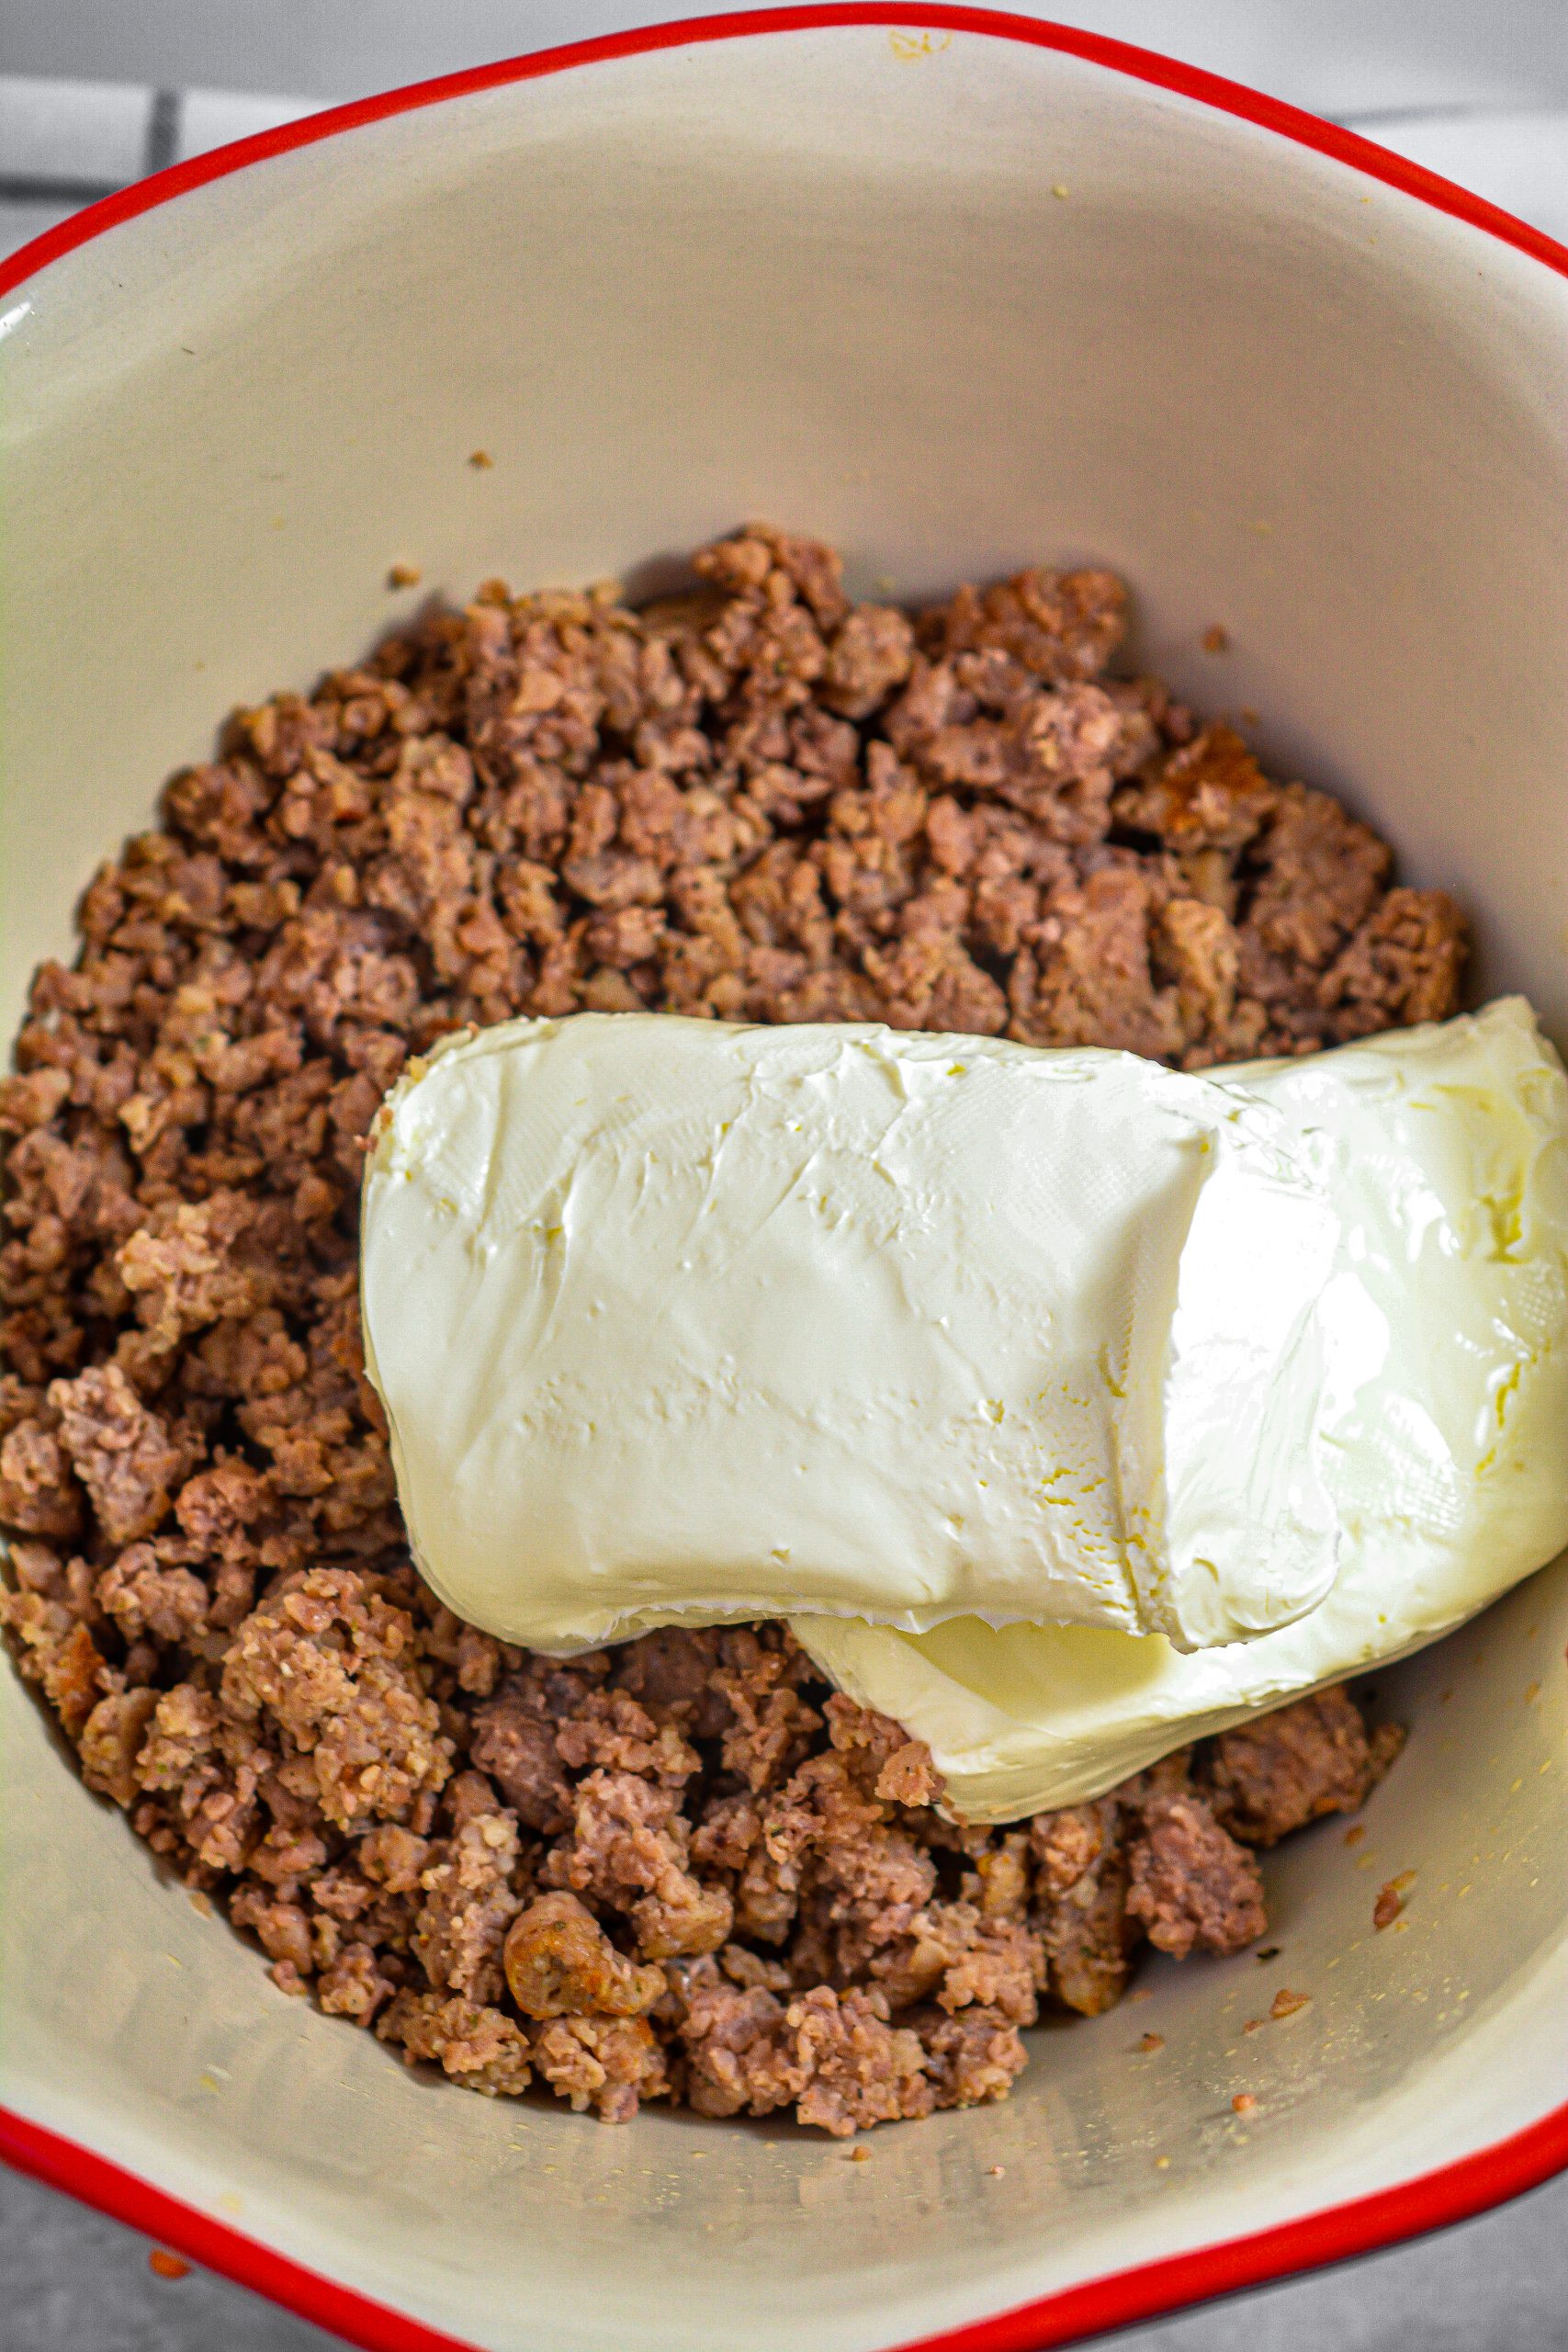 Add the sausage to a bowl, and combine with the cream cheese.